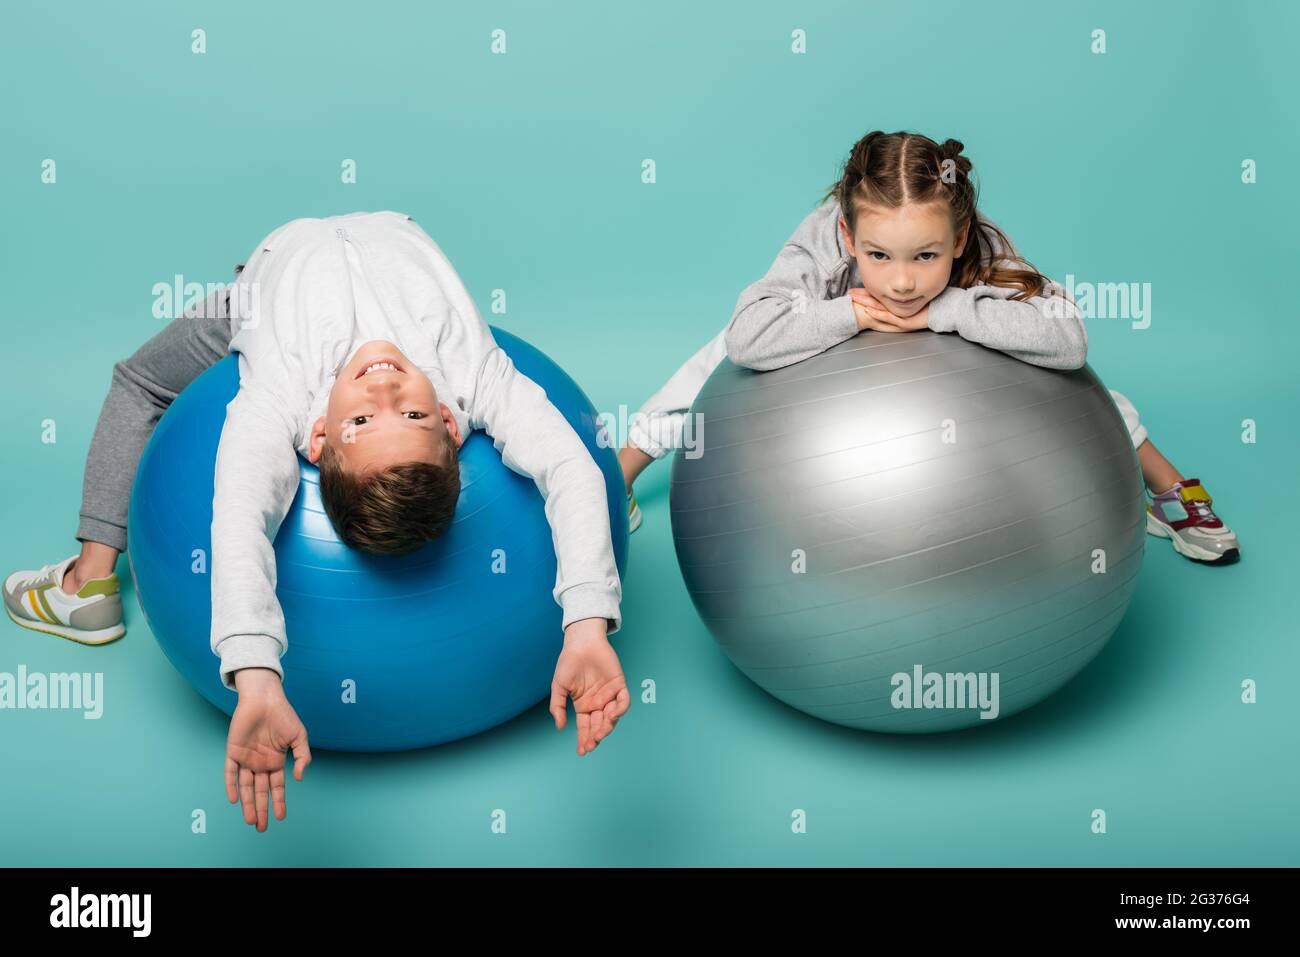 Cheerful little girl wearing sport clothes doing exercises with fitness  ball isolated over blue background Stock Photo - Alamy